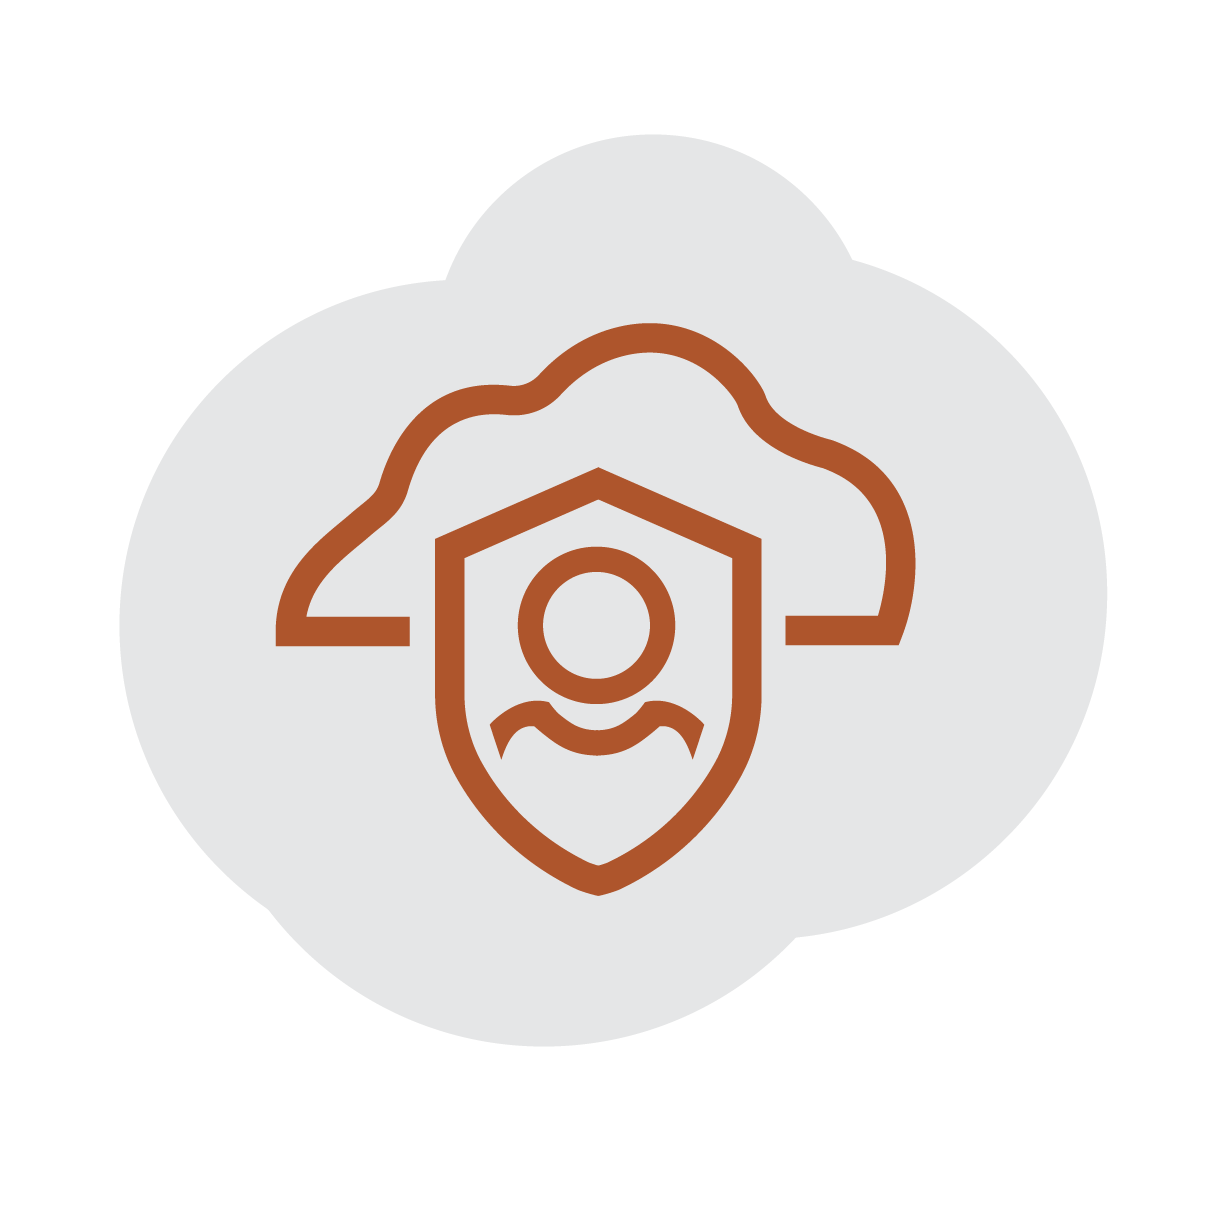 PAAS_Security and Identity Cloud Services